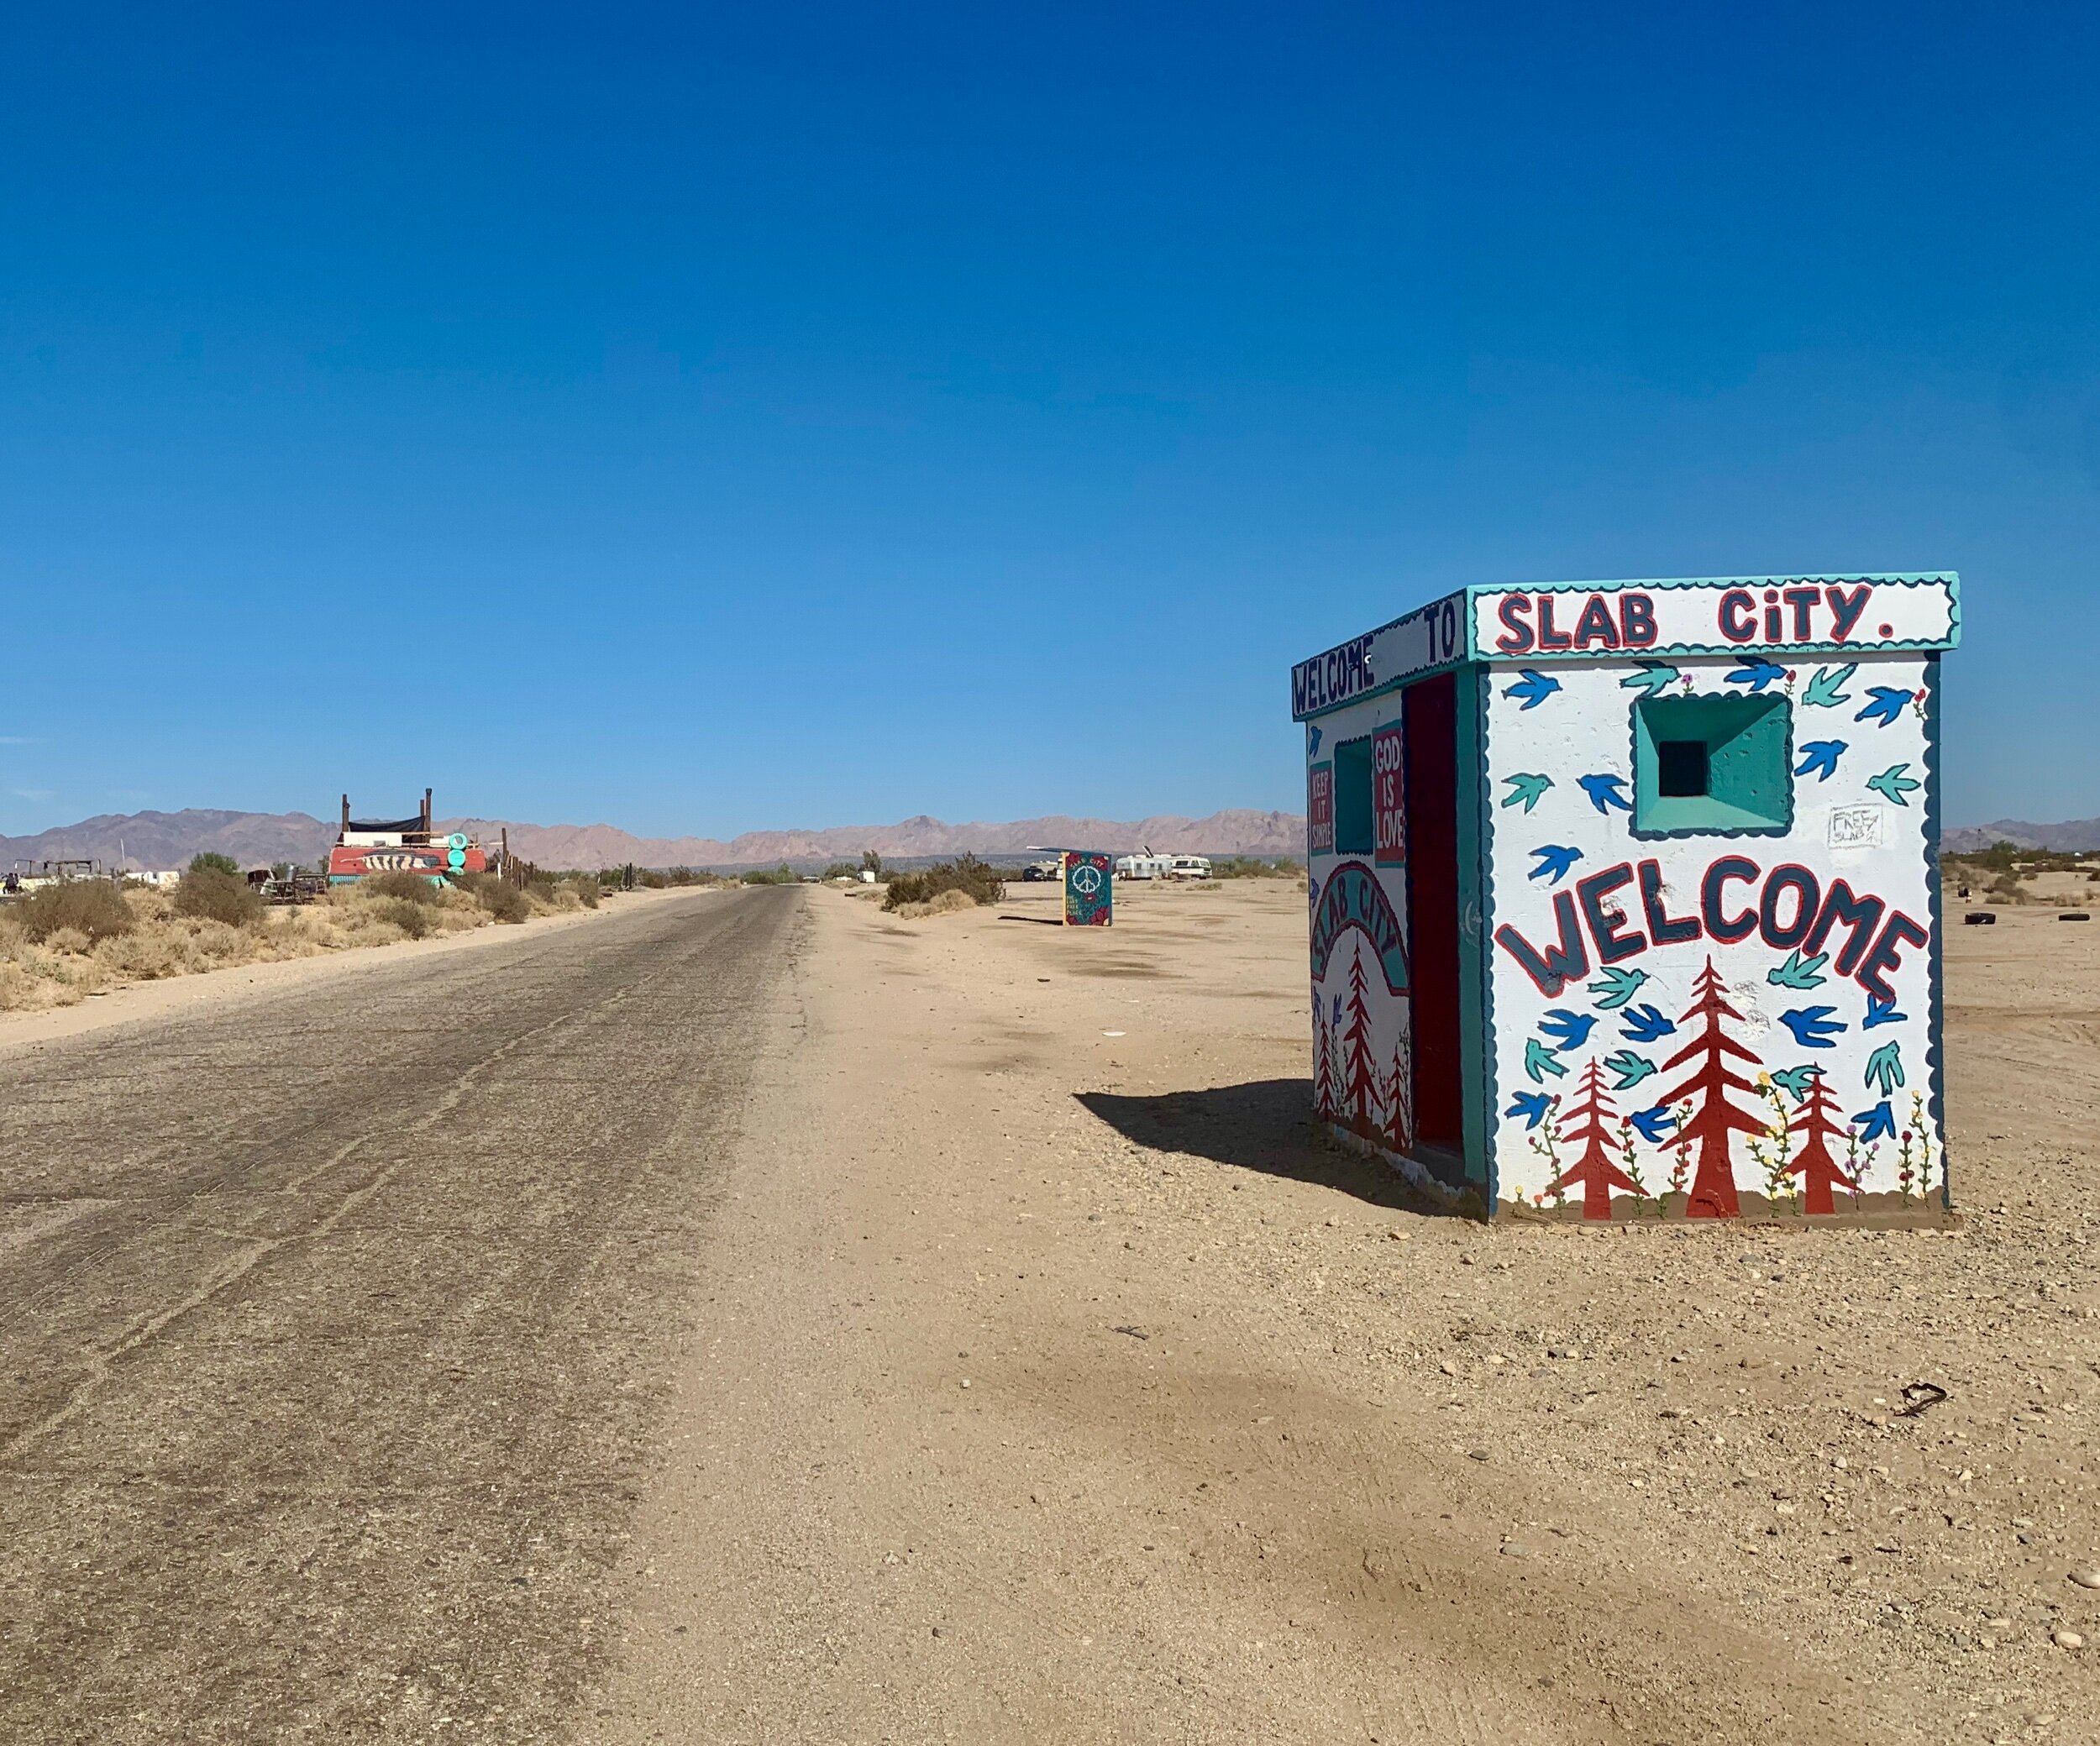  If you thought the last two places were odd, you haven't seen anything yet. Meet  Slab City ,  “ The Last Free Place.”   